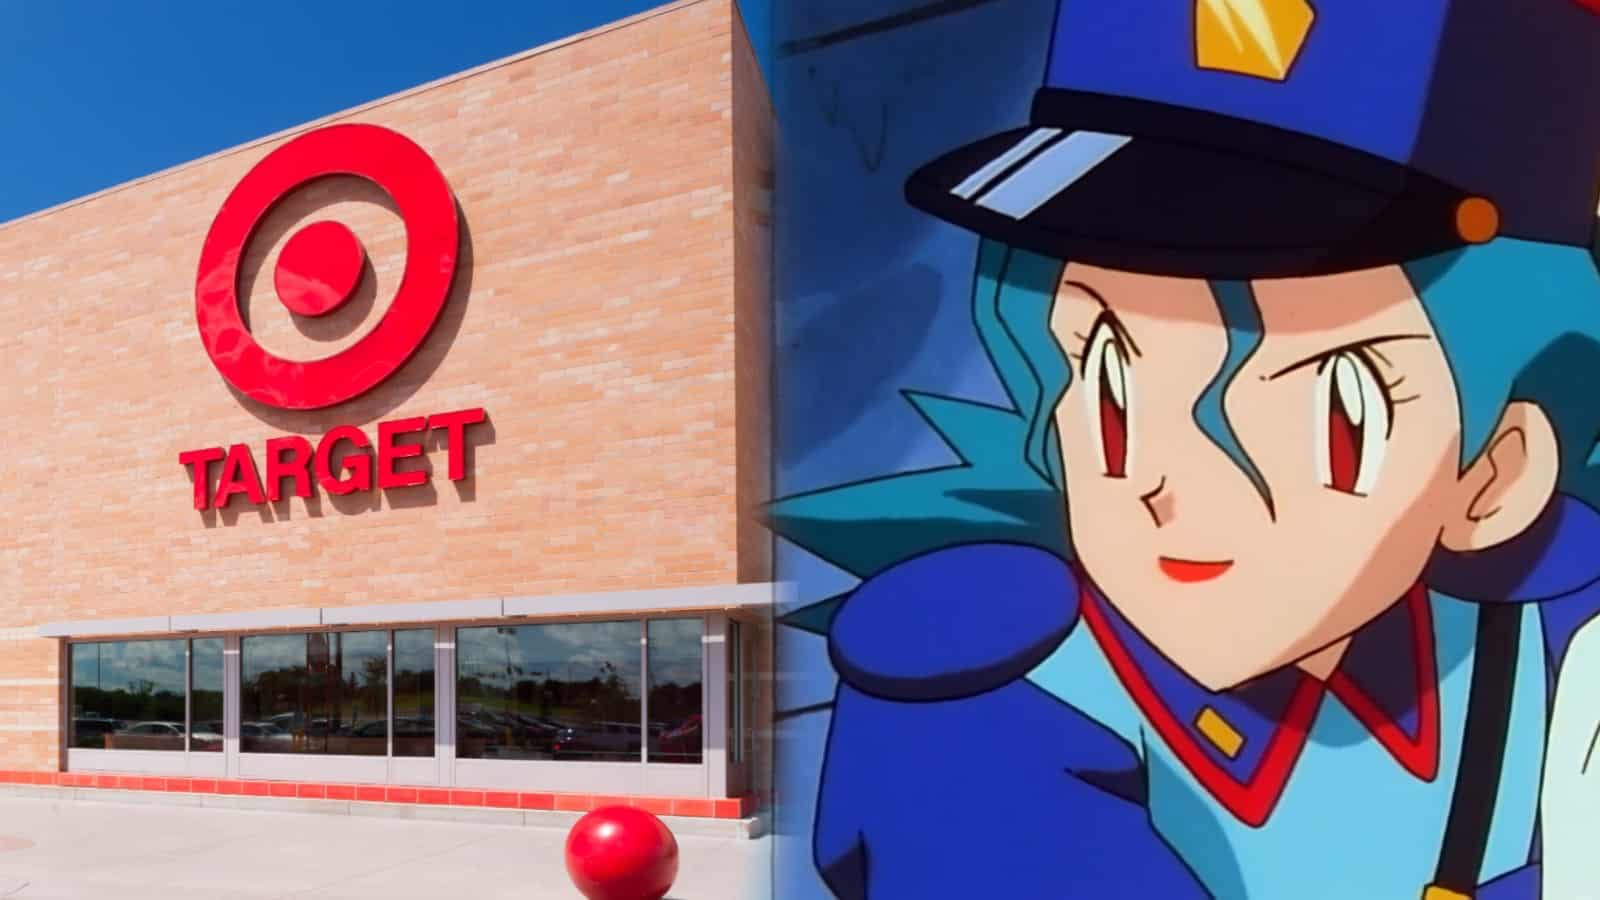 Target store next to Officer Jenny from the Pokemon anime